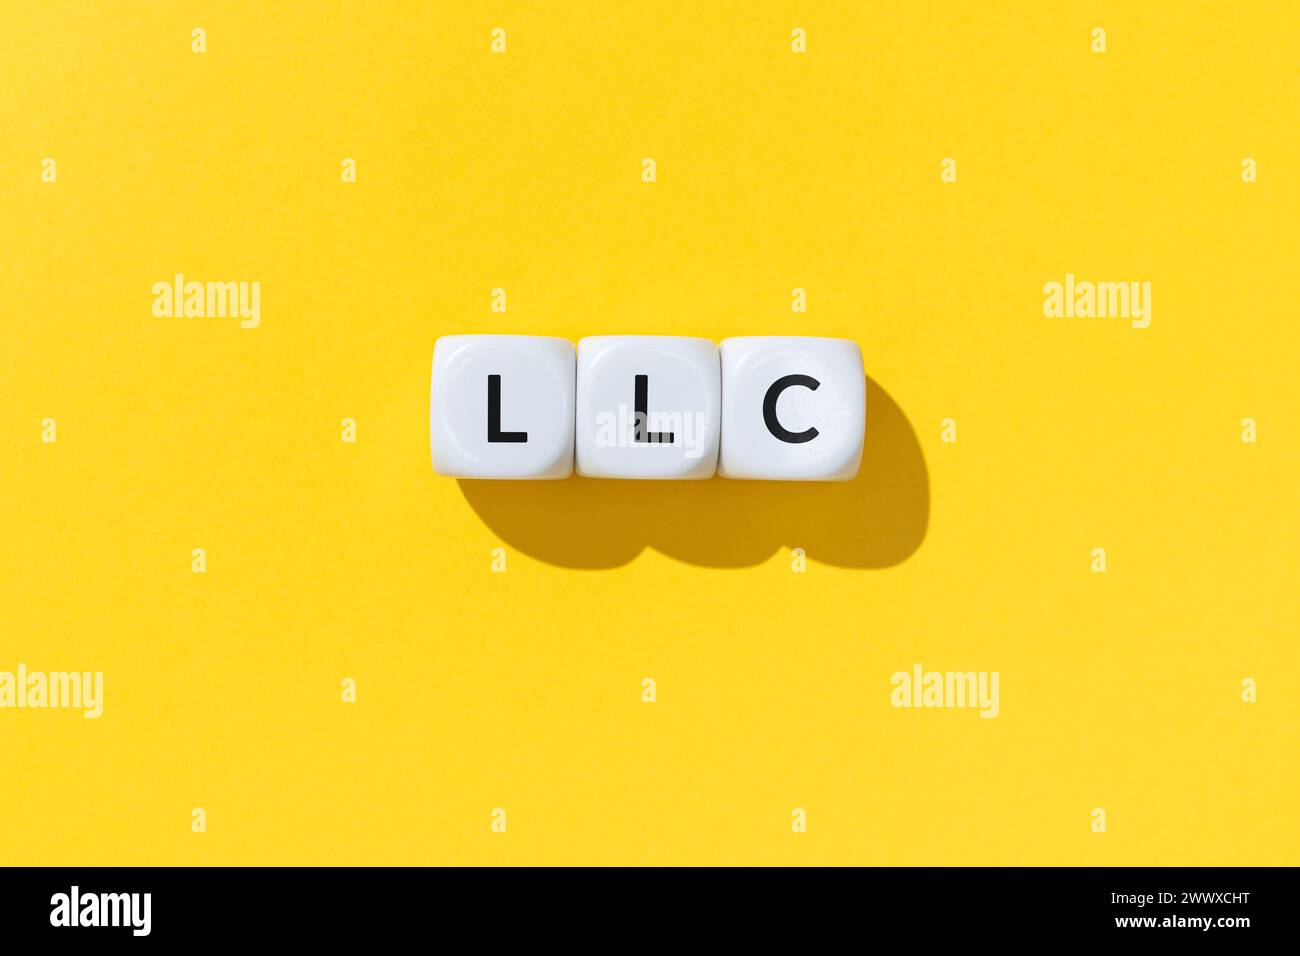 LLC or Limited Liability Company text on white cube blocks isolated on yellow background Stock Photo